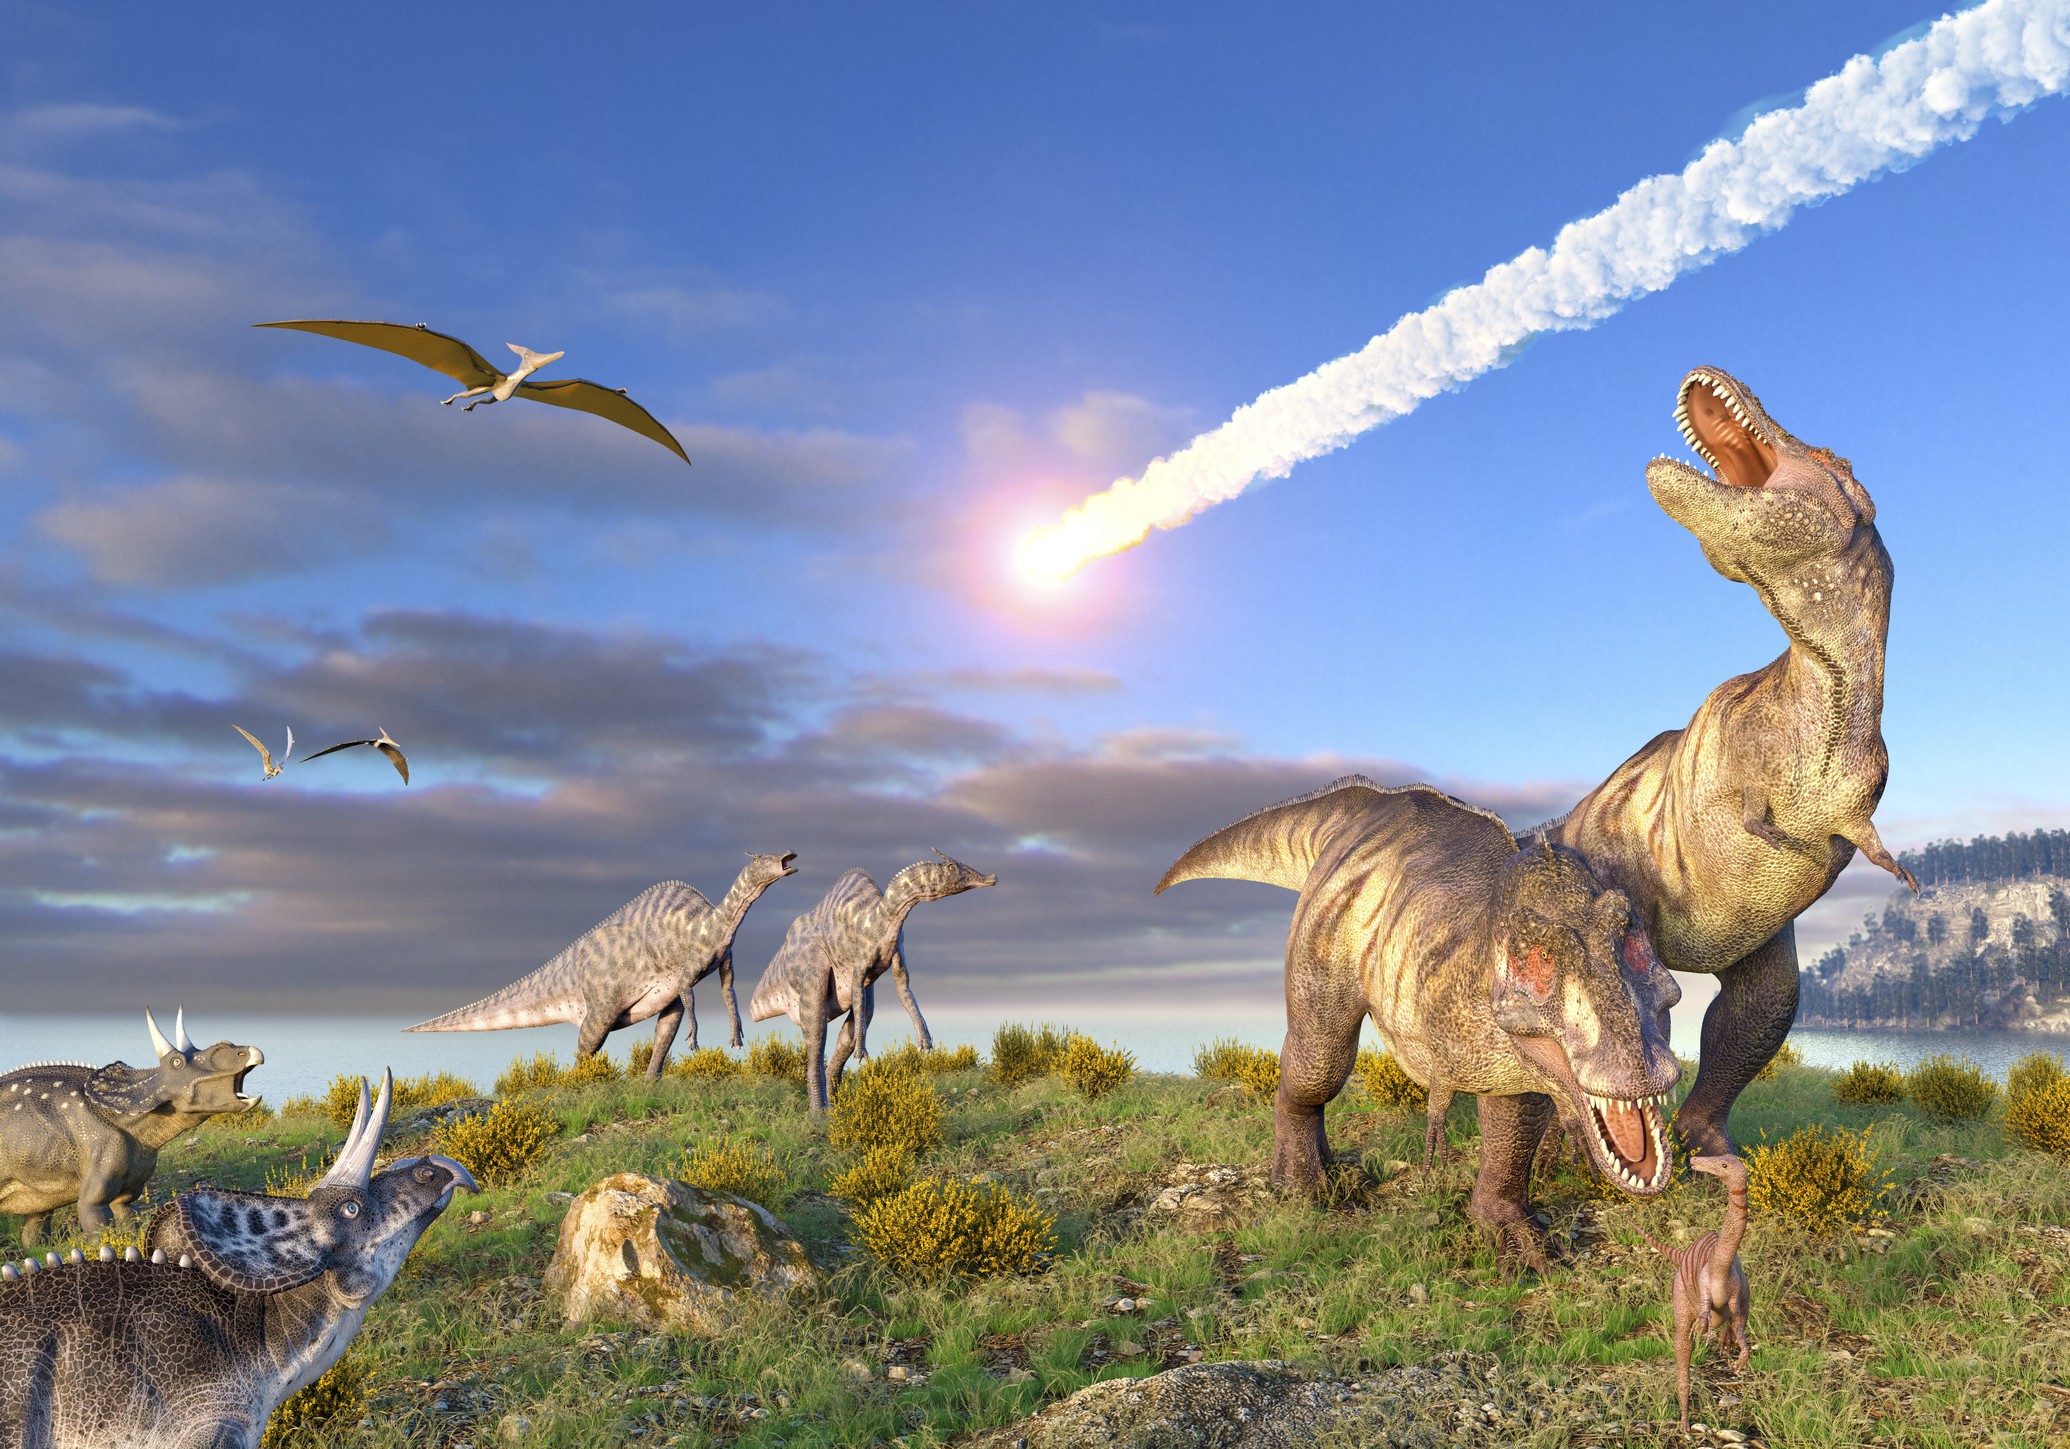 Illustration of the K T Event at the end of the Cretaceous Period. A ten-kilometre-wide asteroid or comet is entering the Earths atmosphere as dinosaurs, including T. rex, look on. (Foto: Getty Images/Science Photo Libra)